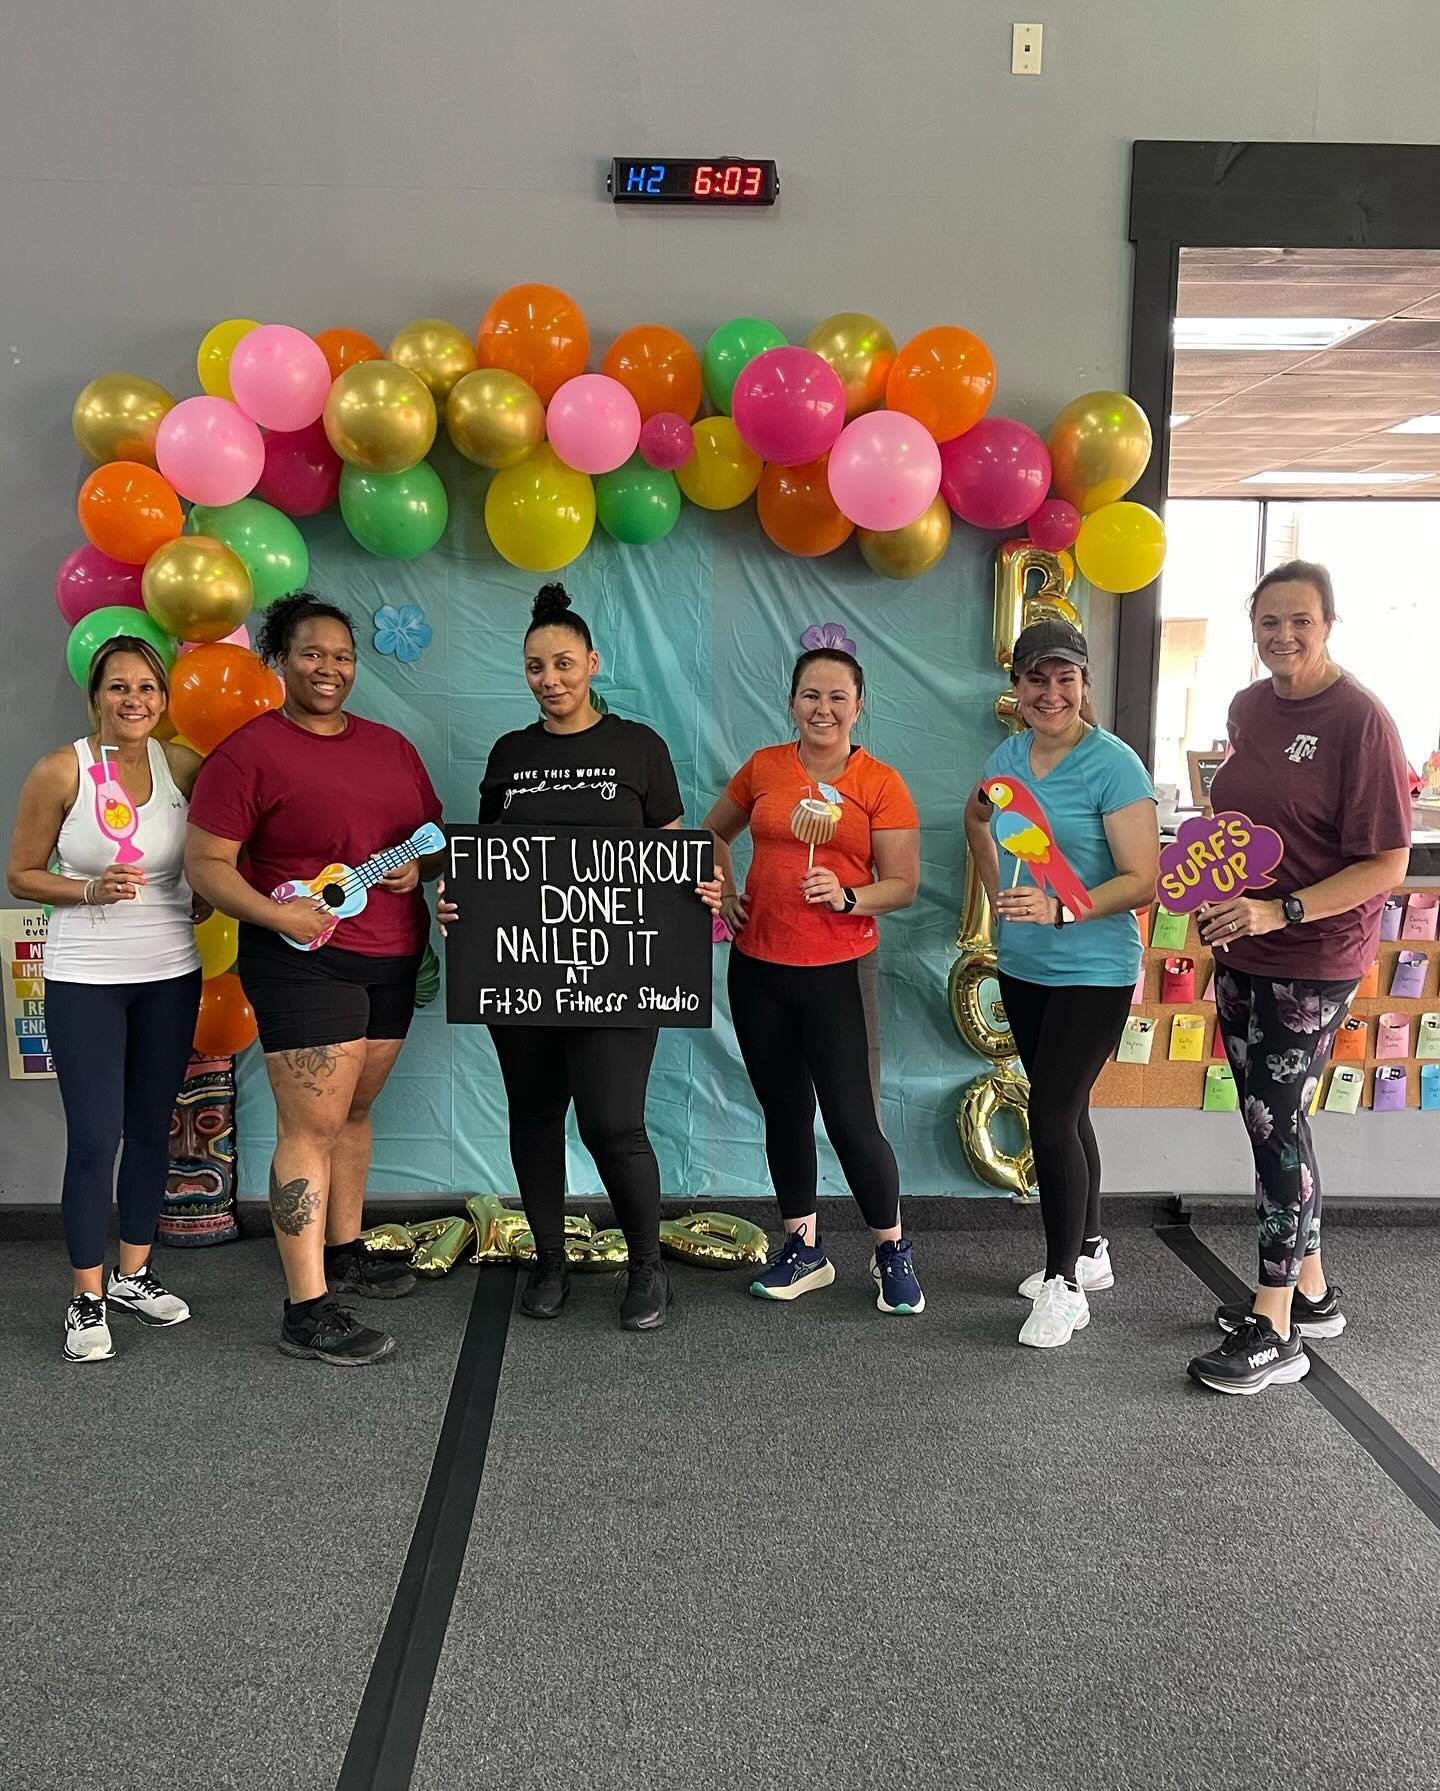 Happy Sunday!!! We&rsquo;ve been busy the last couple of weeks at the studio and out in the community!! 

Let&rsquo;s do a recap of all the Fit30 fun we&rsquo;ve been having! 

We welcomed Kerri, Linda, Dana, Mollie, Aschlei, Laurie, and Sandi for th